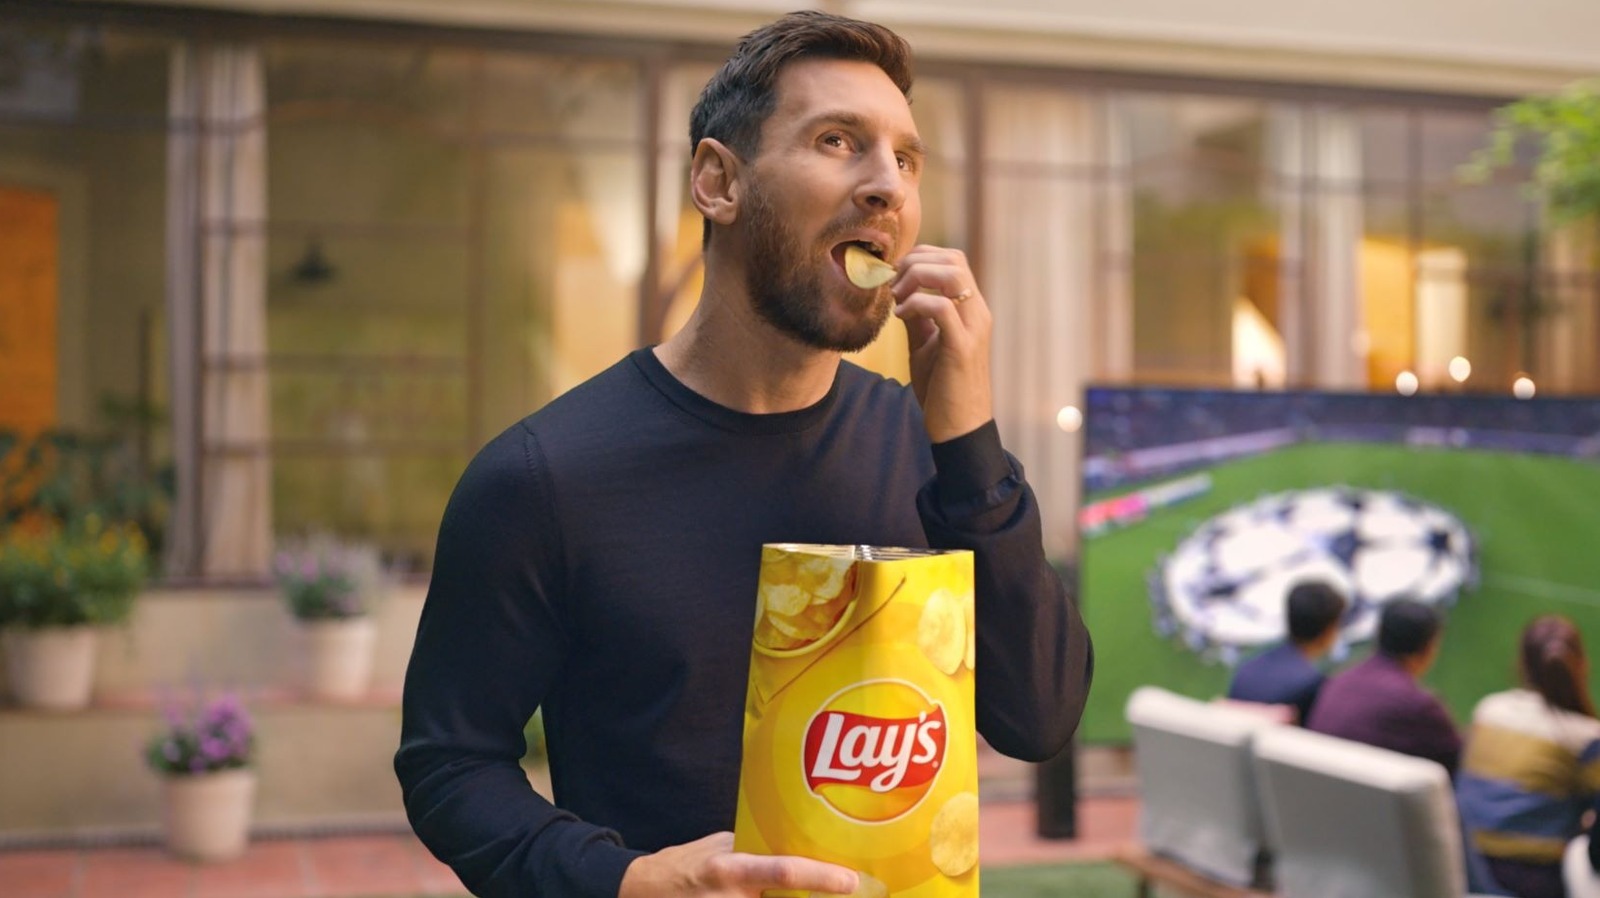 Lays messi messages